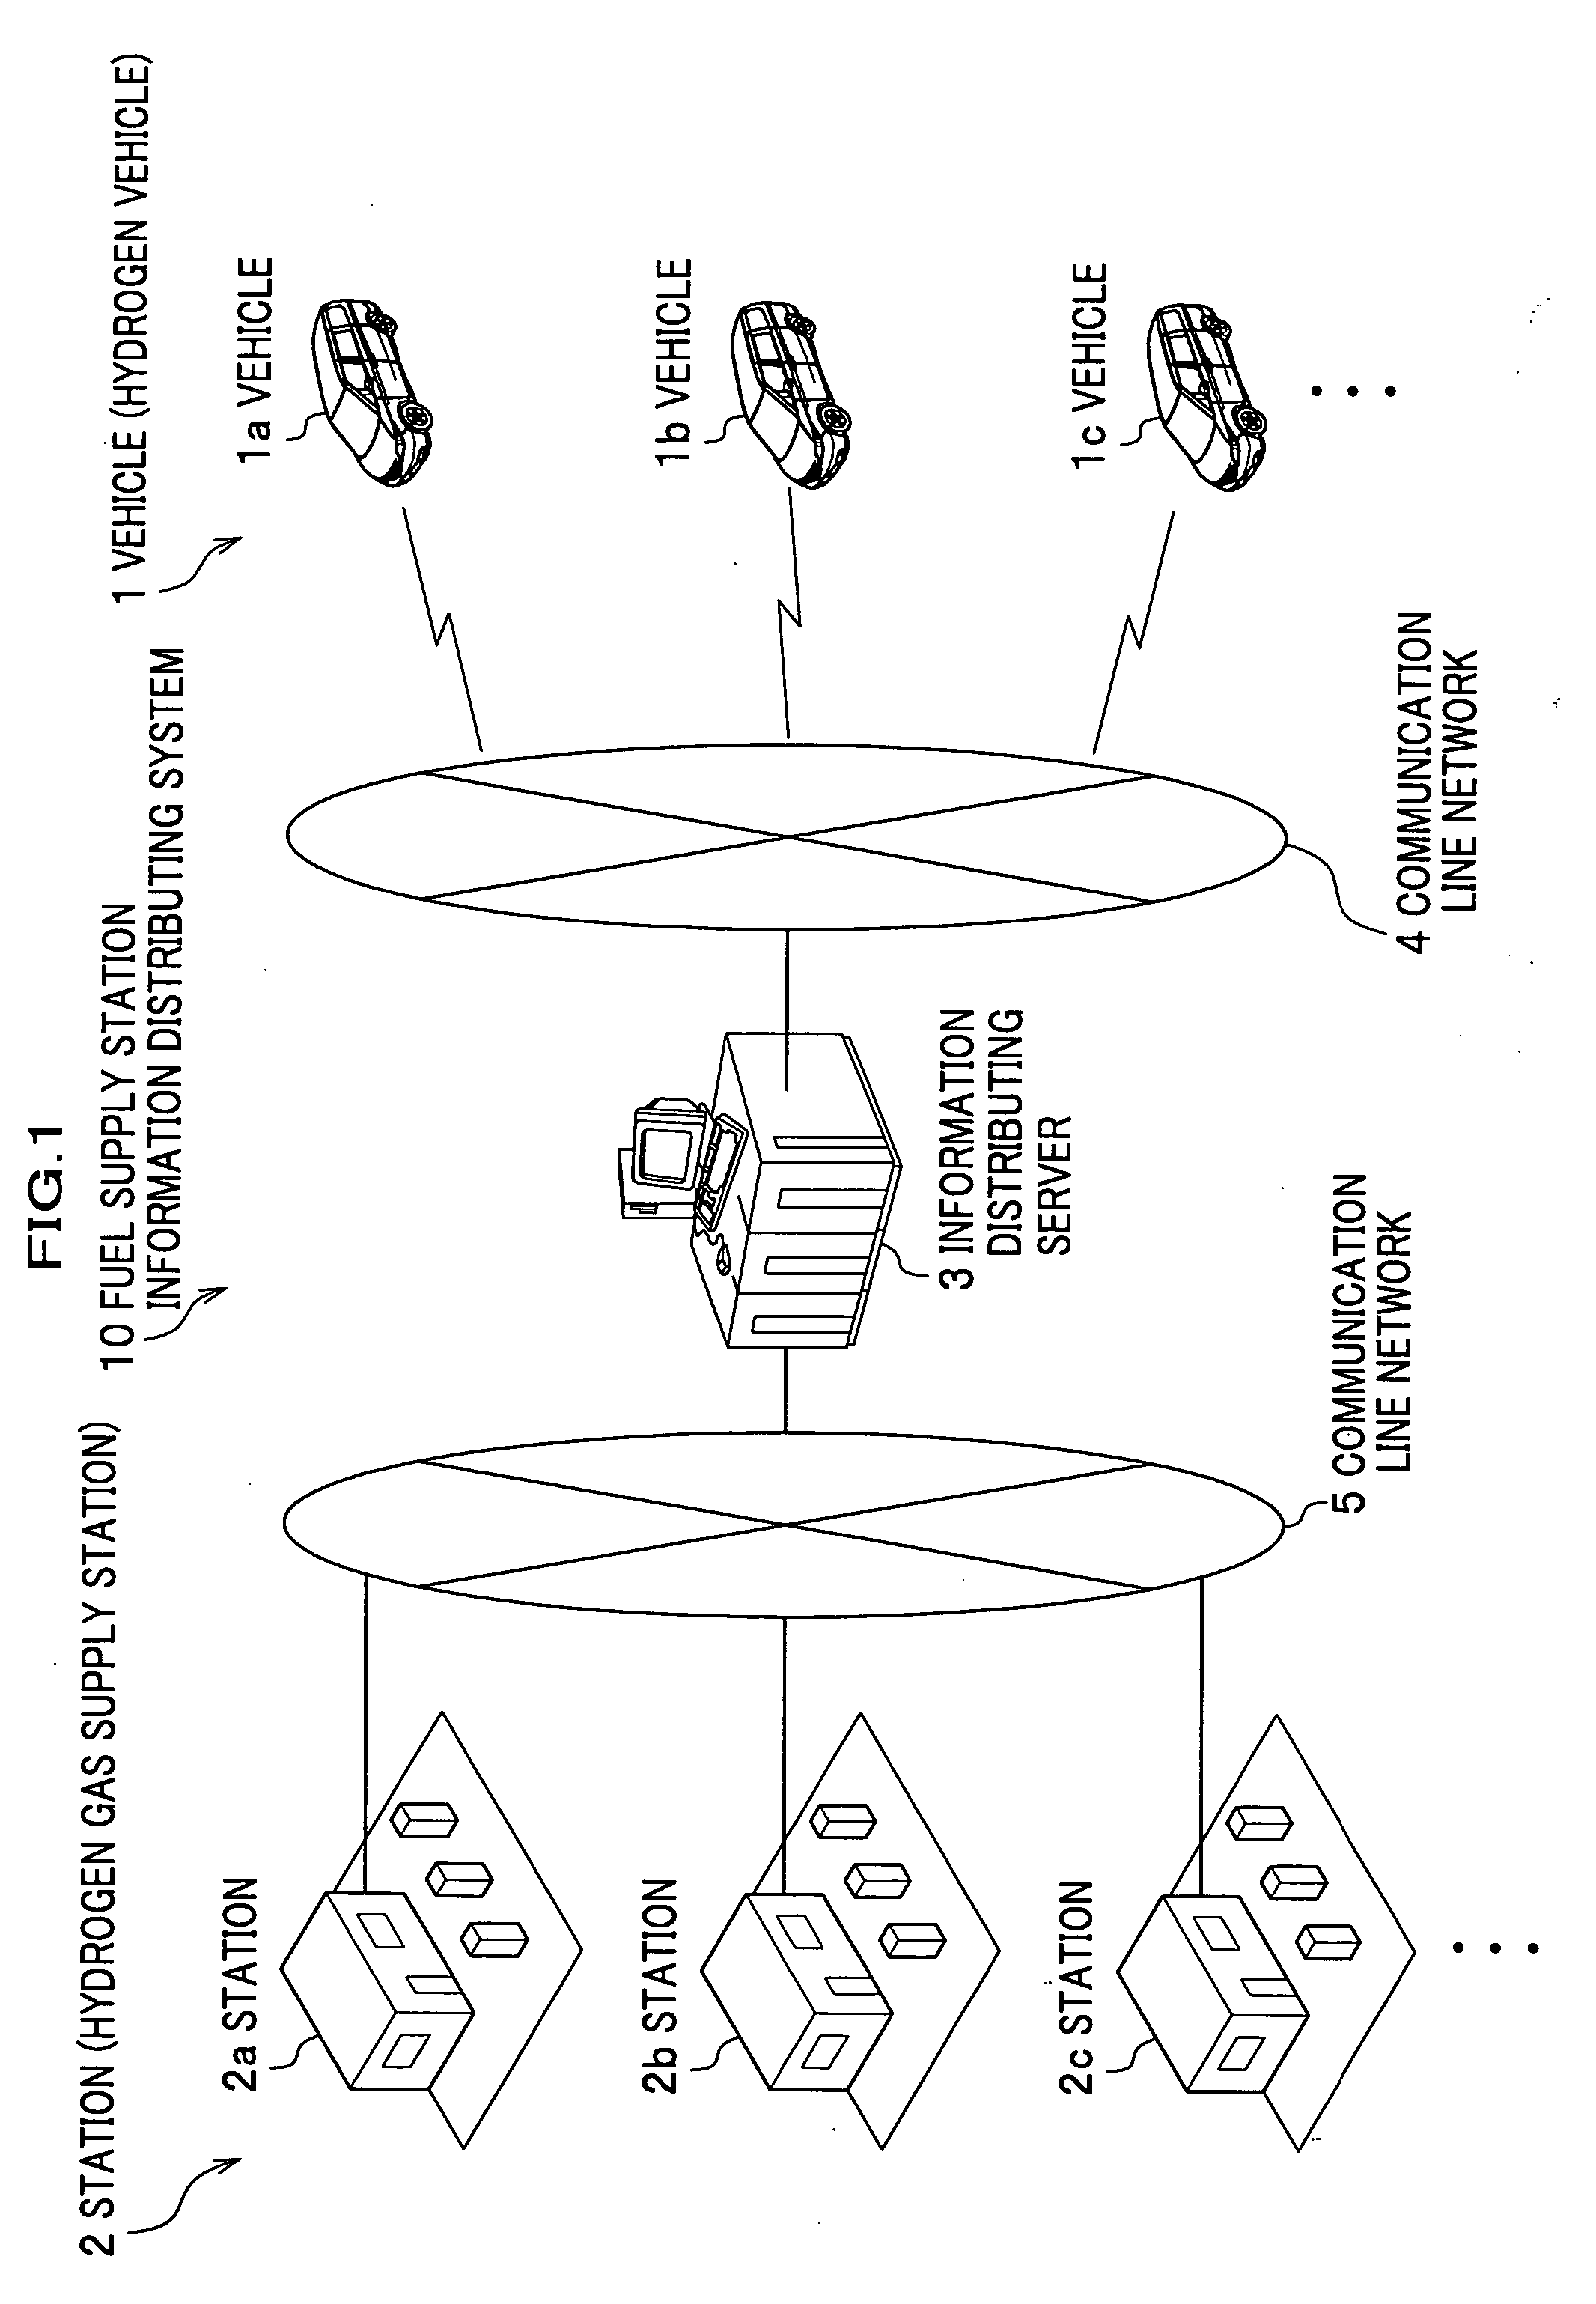 Fuel supply station information distributing system, fuel supply station information distributing server, and fuel supply station information displaying device